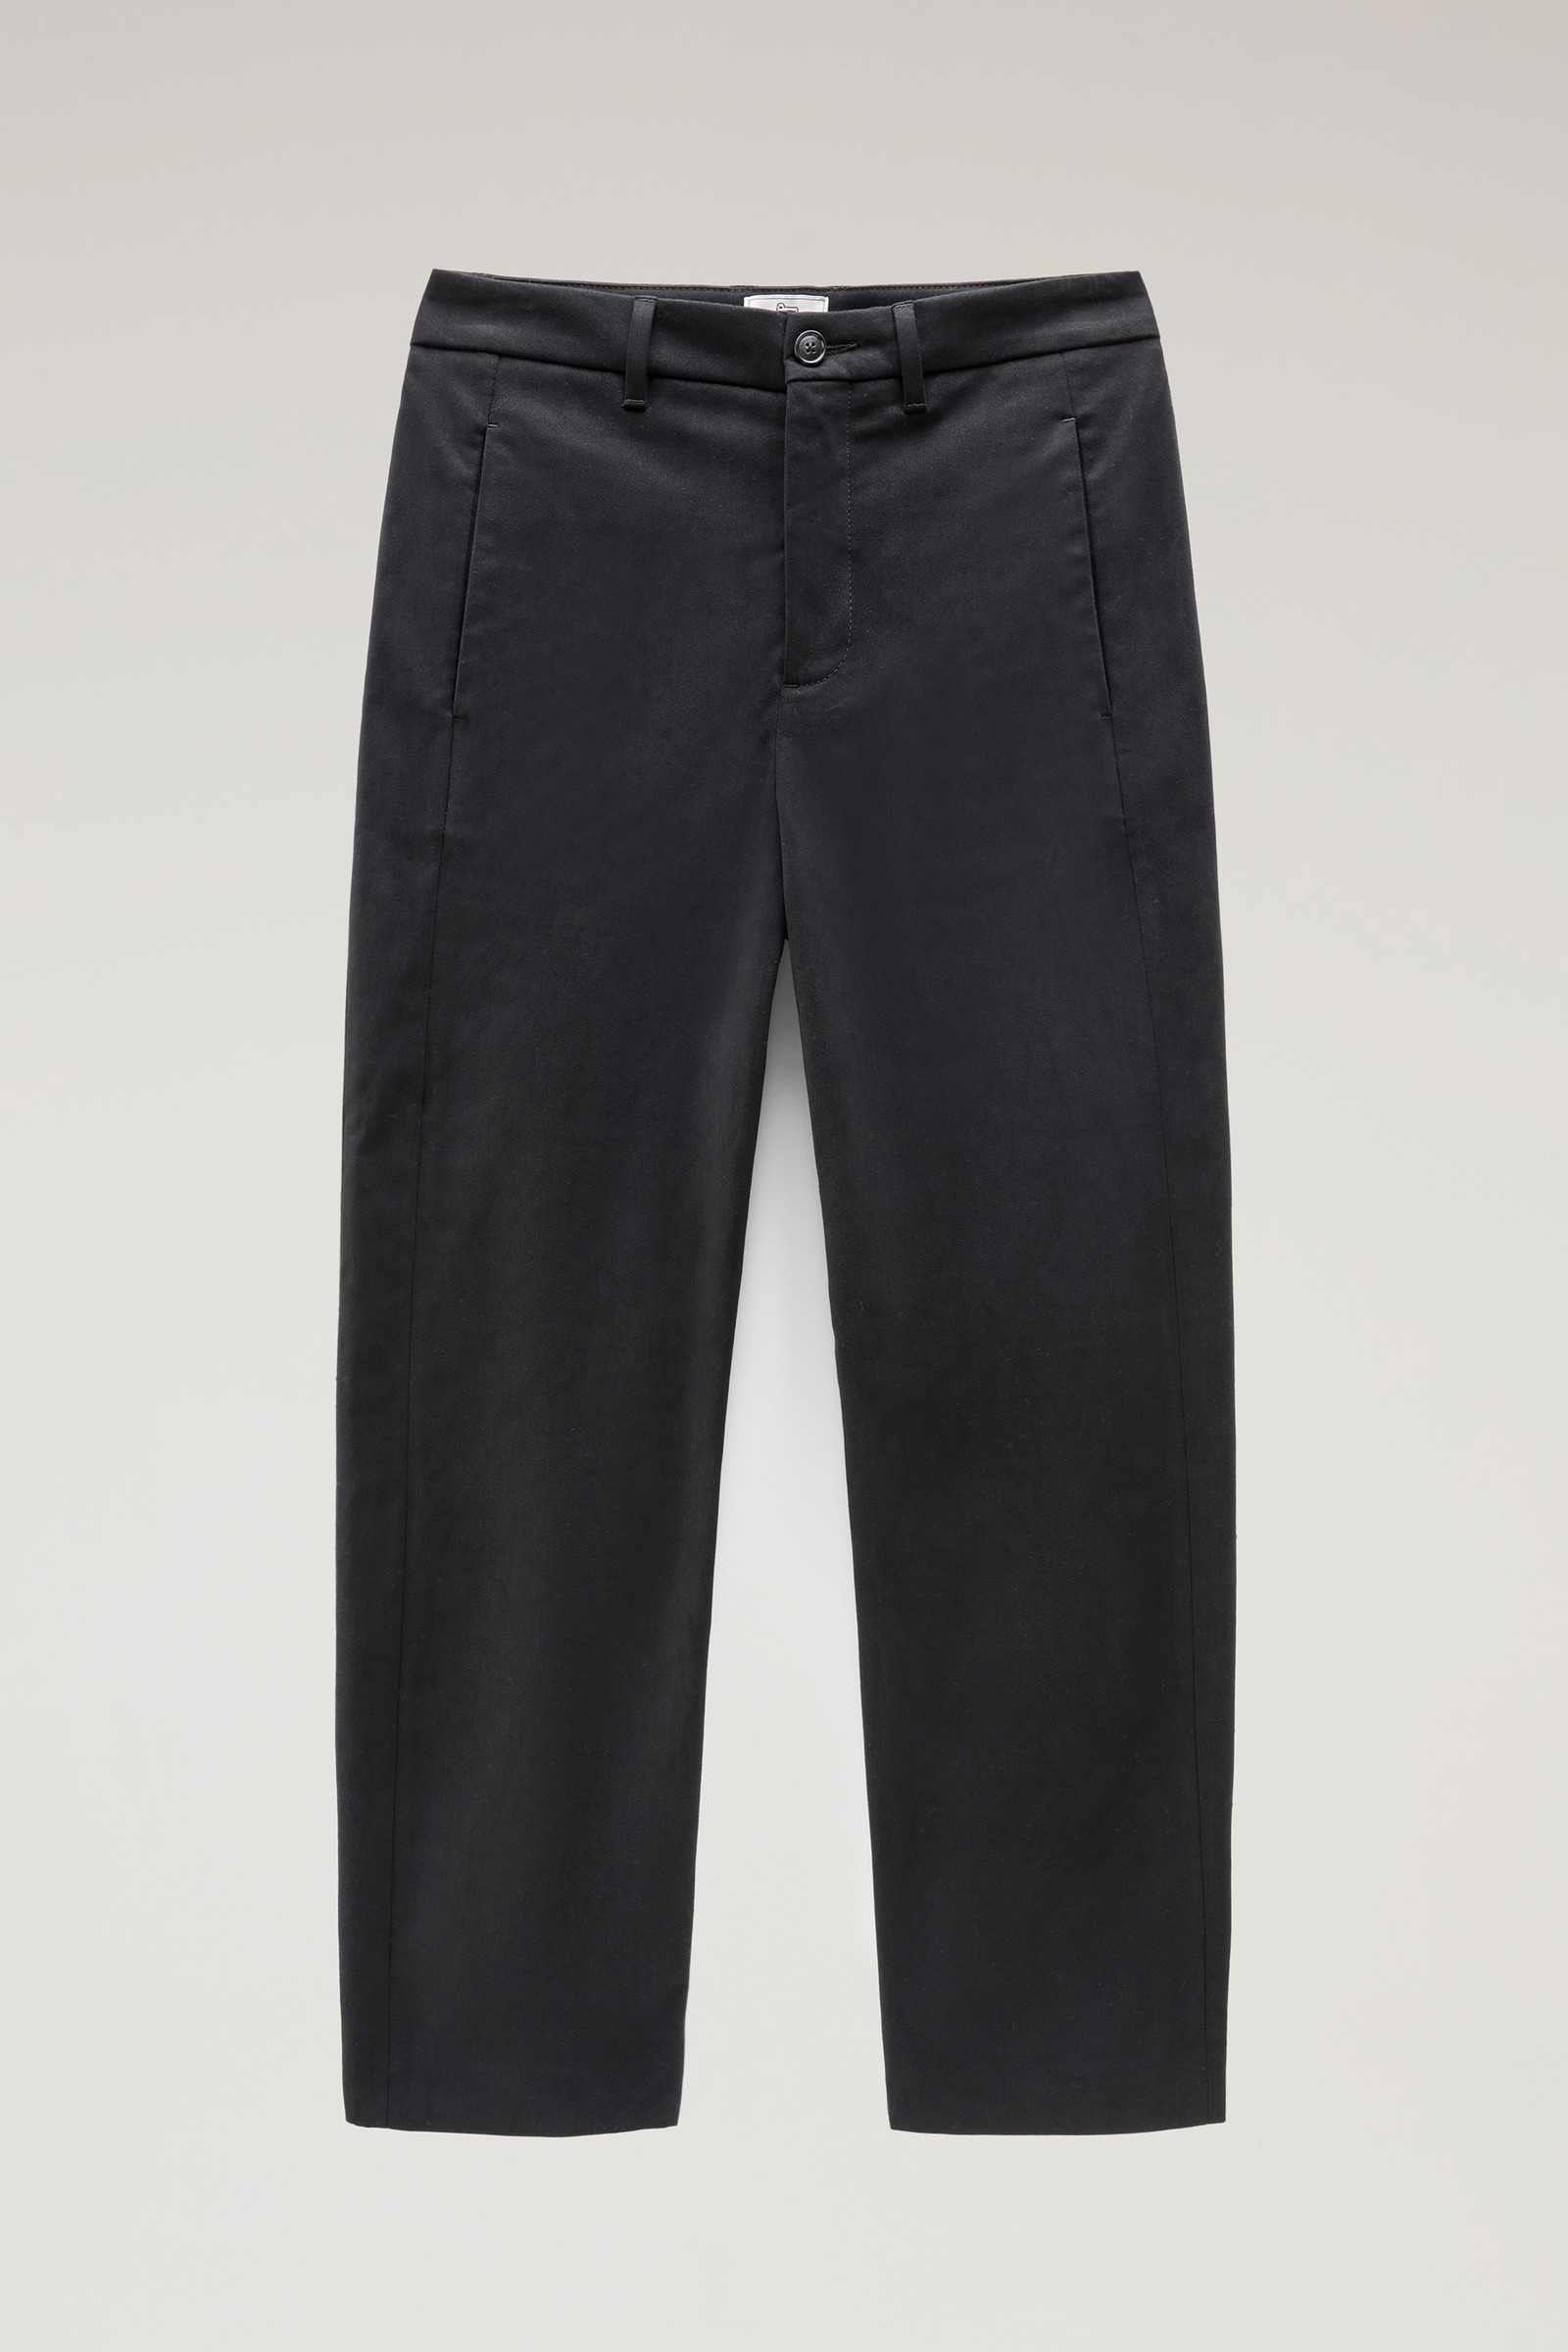 Light Weight Cotton Fine Twill Pants, MakeYourOwnJeans®